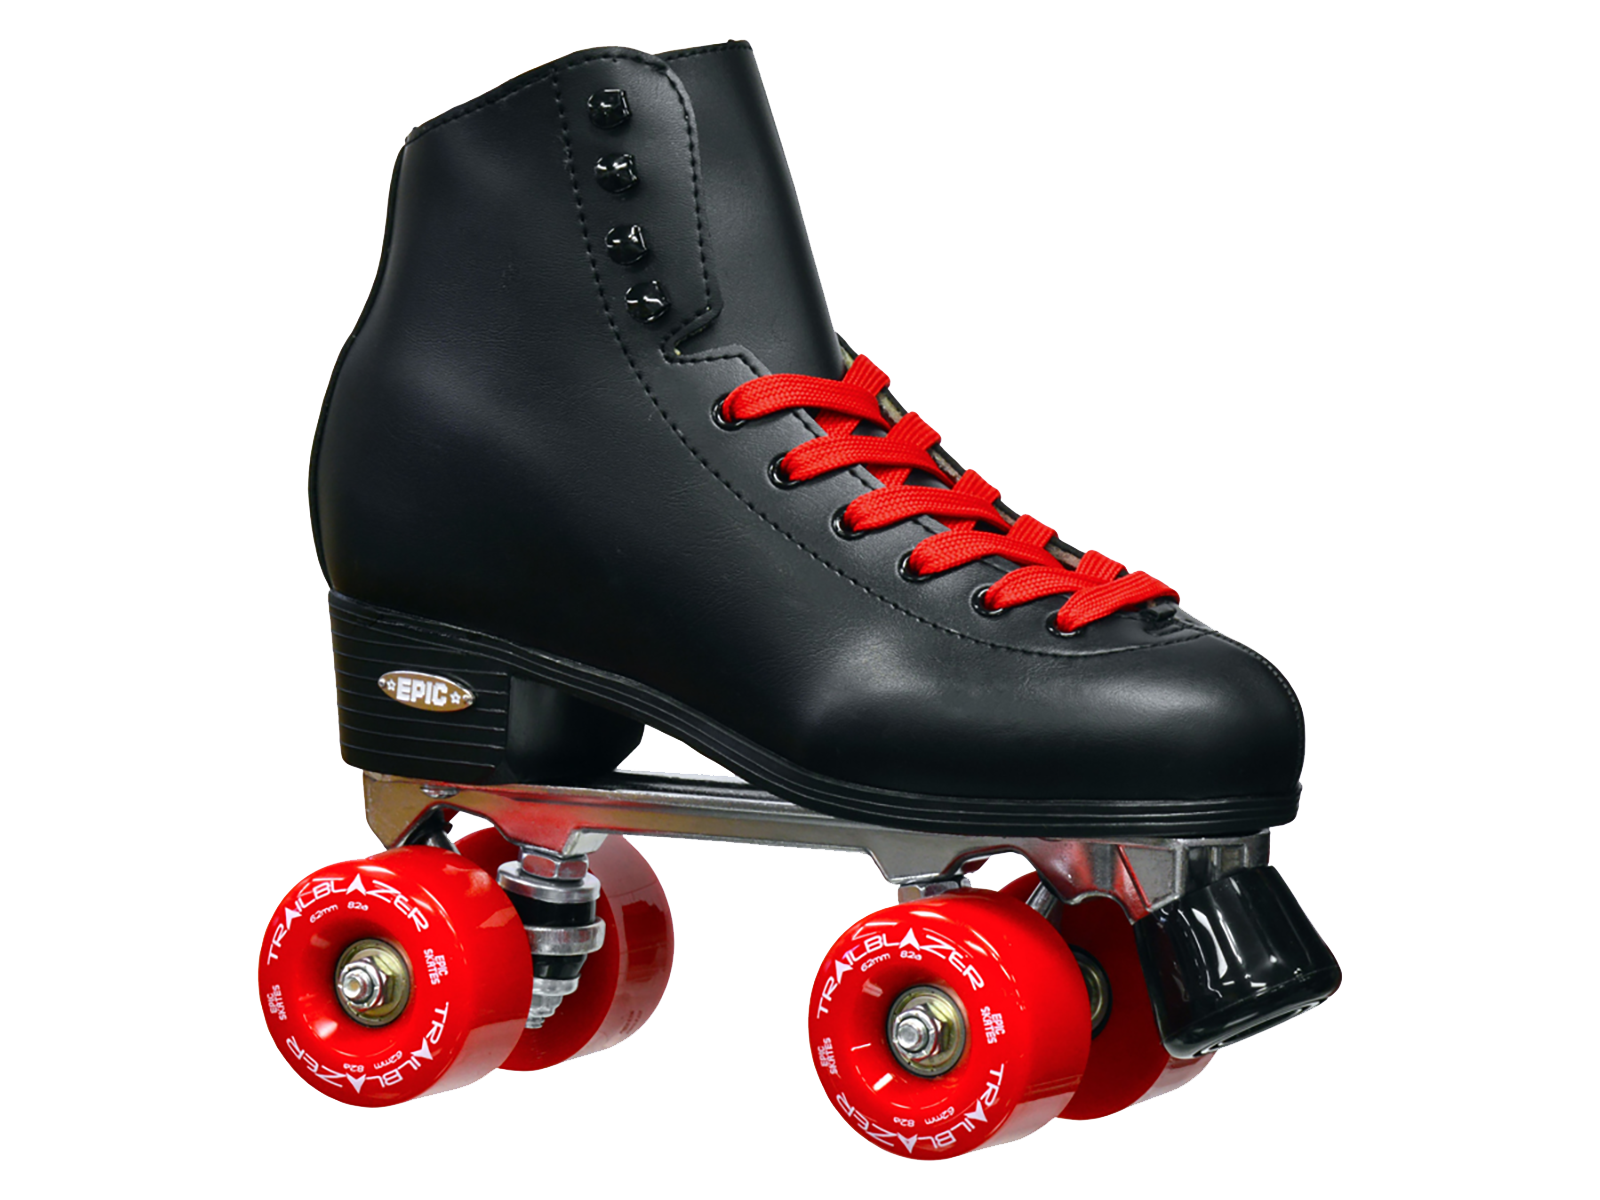 Epic Skates Classic High-Top Quad Roller Skates with Red Wheels Size 11 